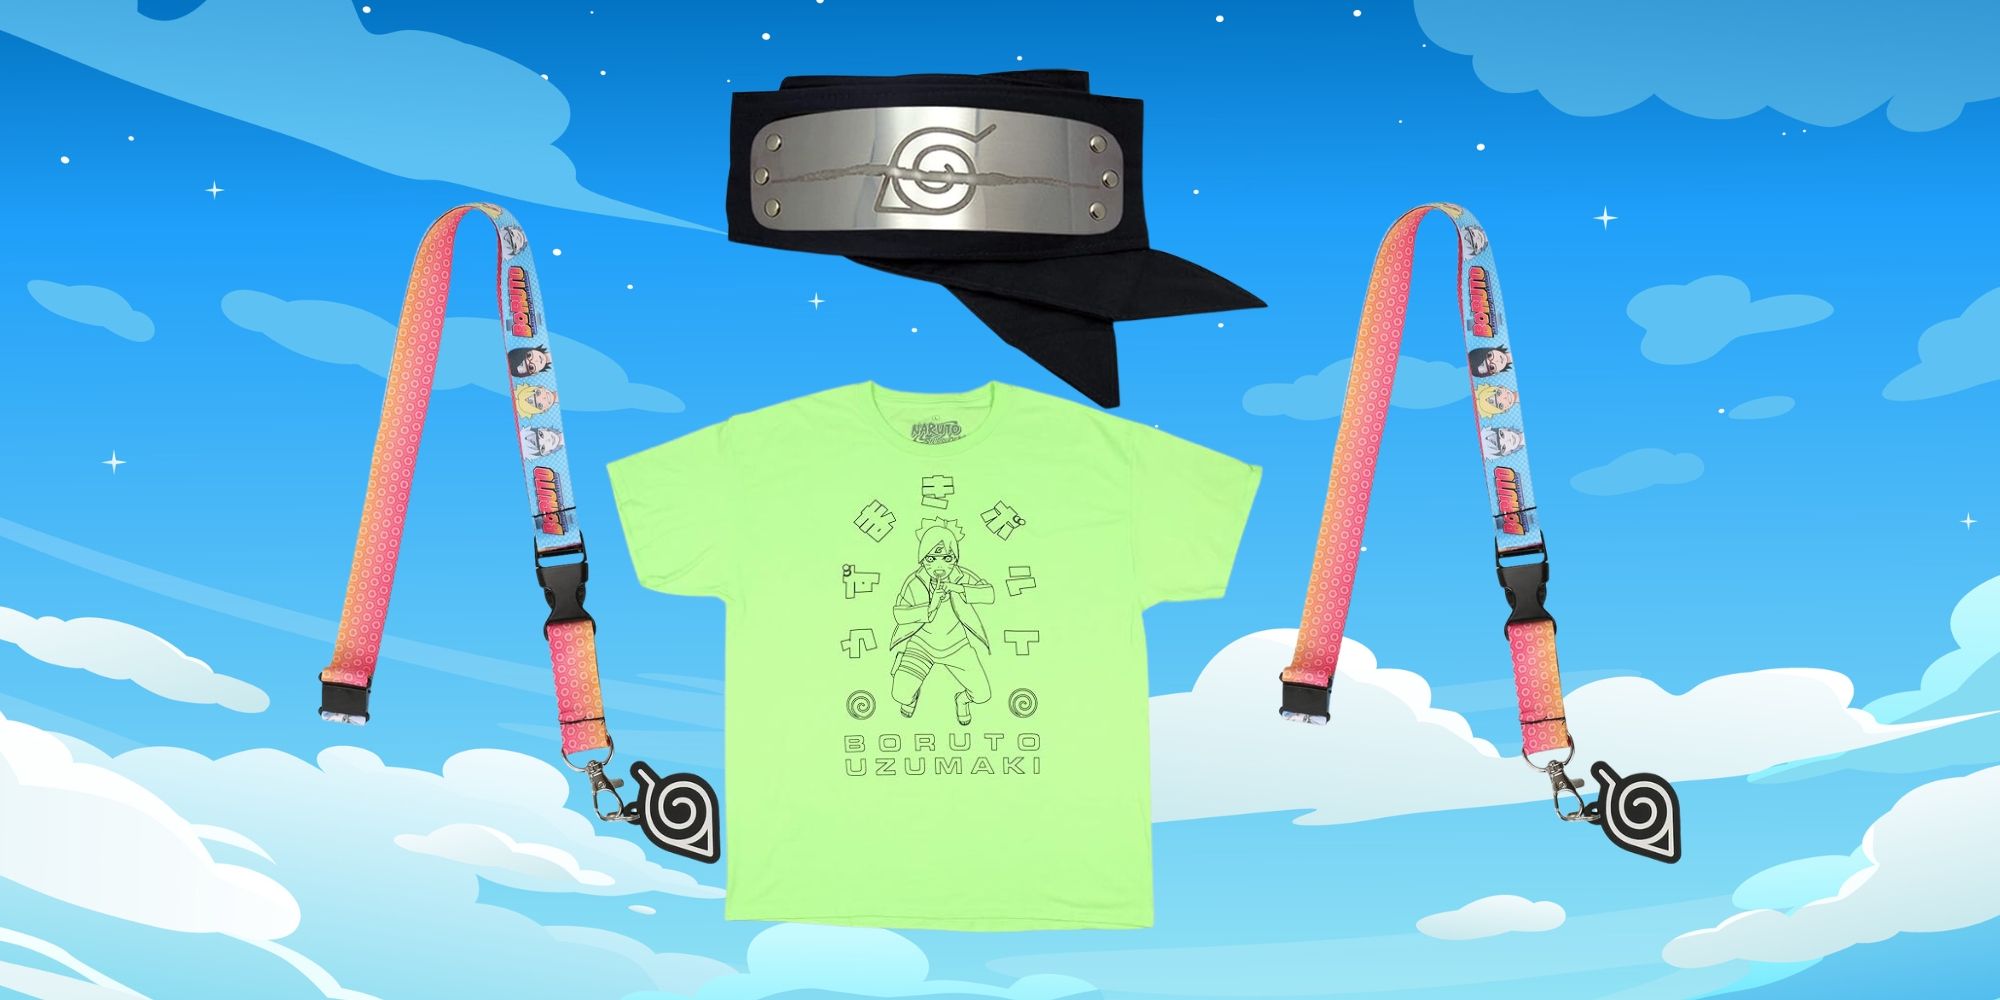 Best Boruto Apparel with an image of two Boruto lanyards, a t-shirt of Boruto in green, and the leaf village headband